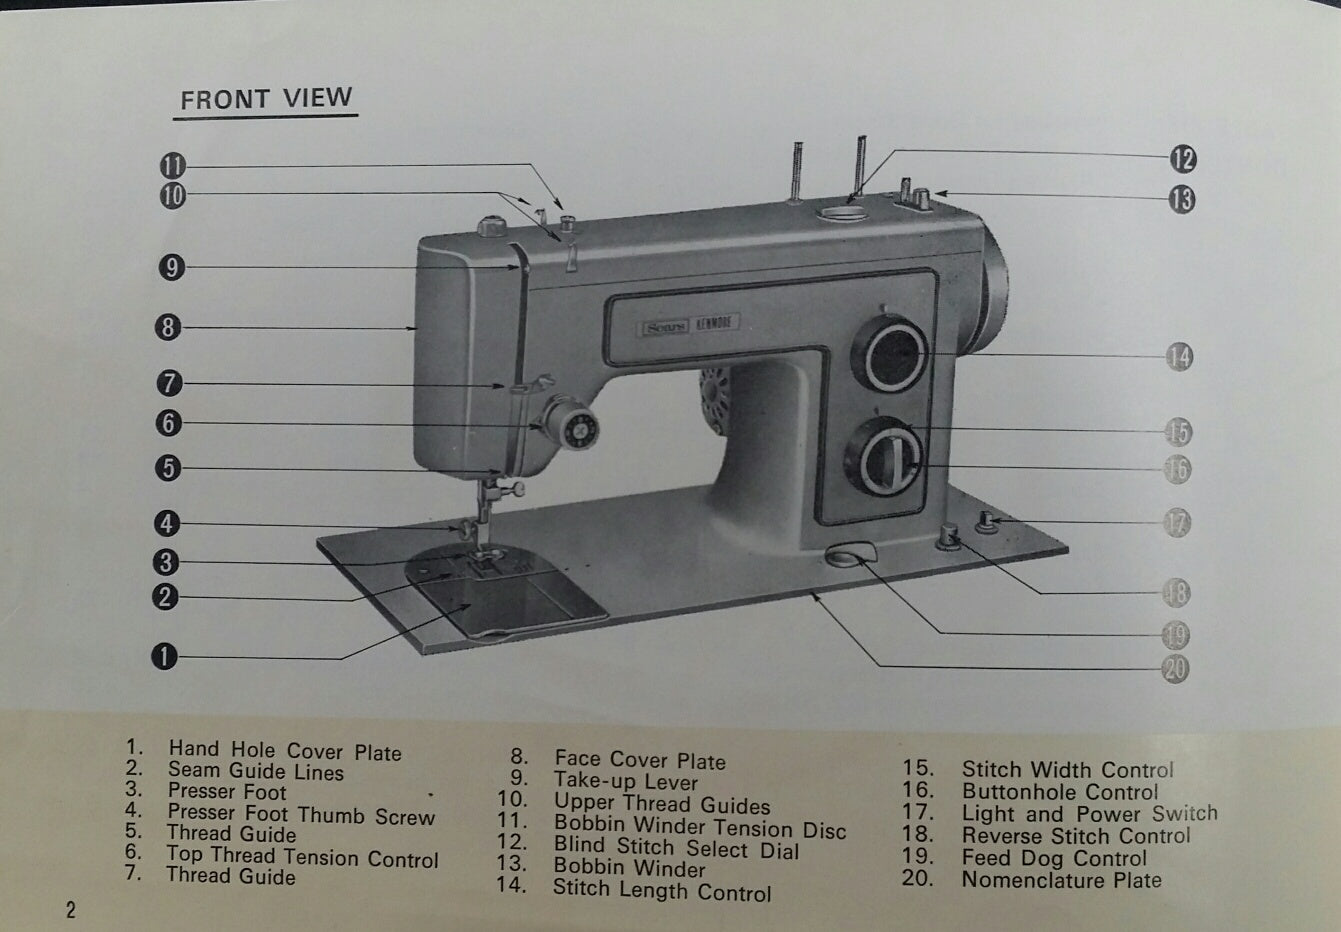 Instruction Manual, Super Deluxe Model 139 - mrsewing